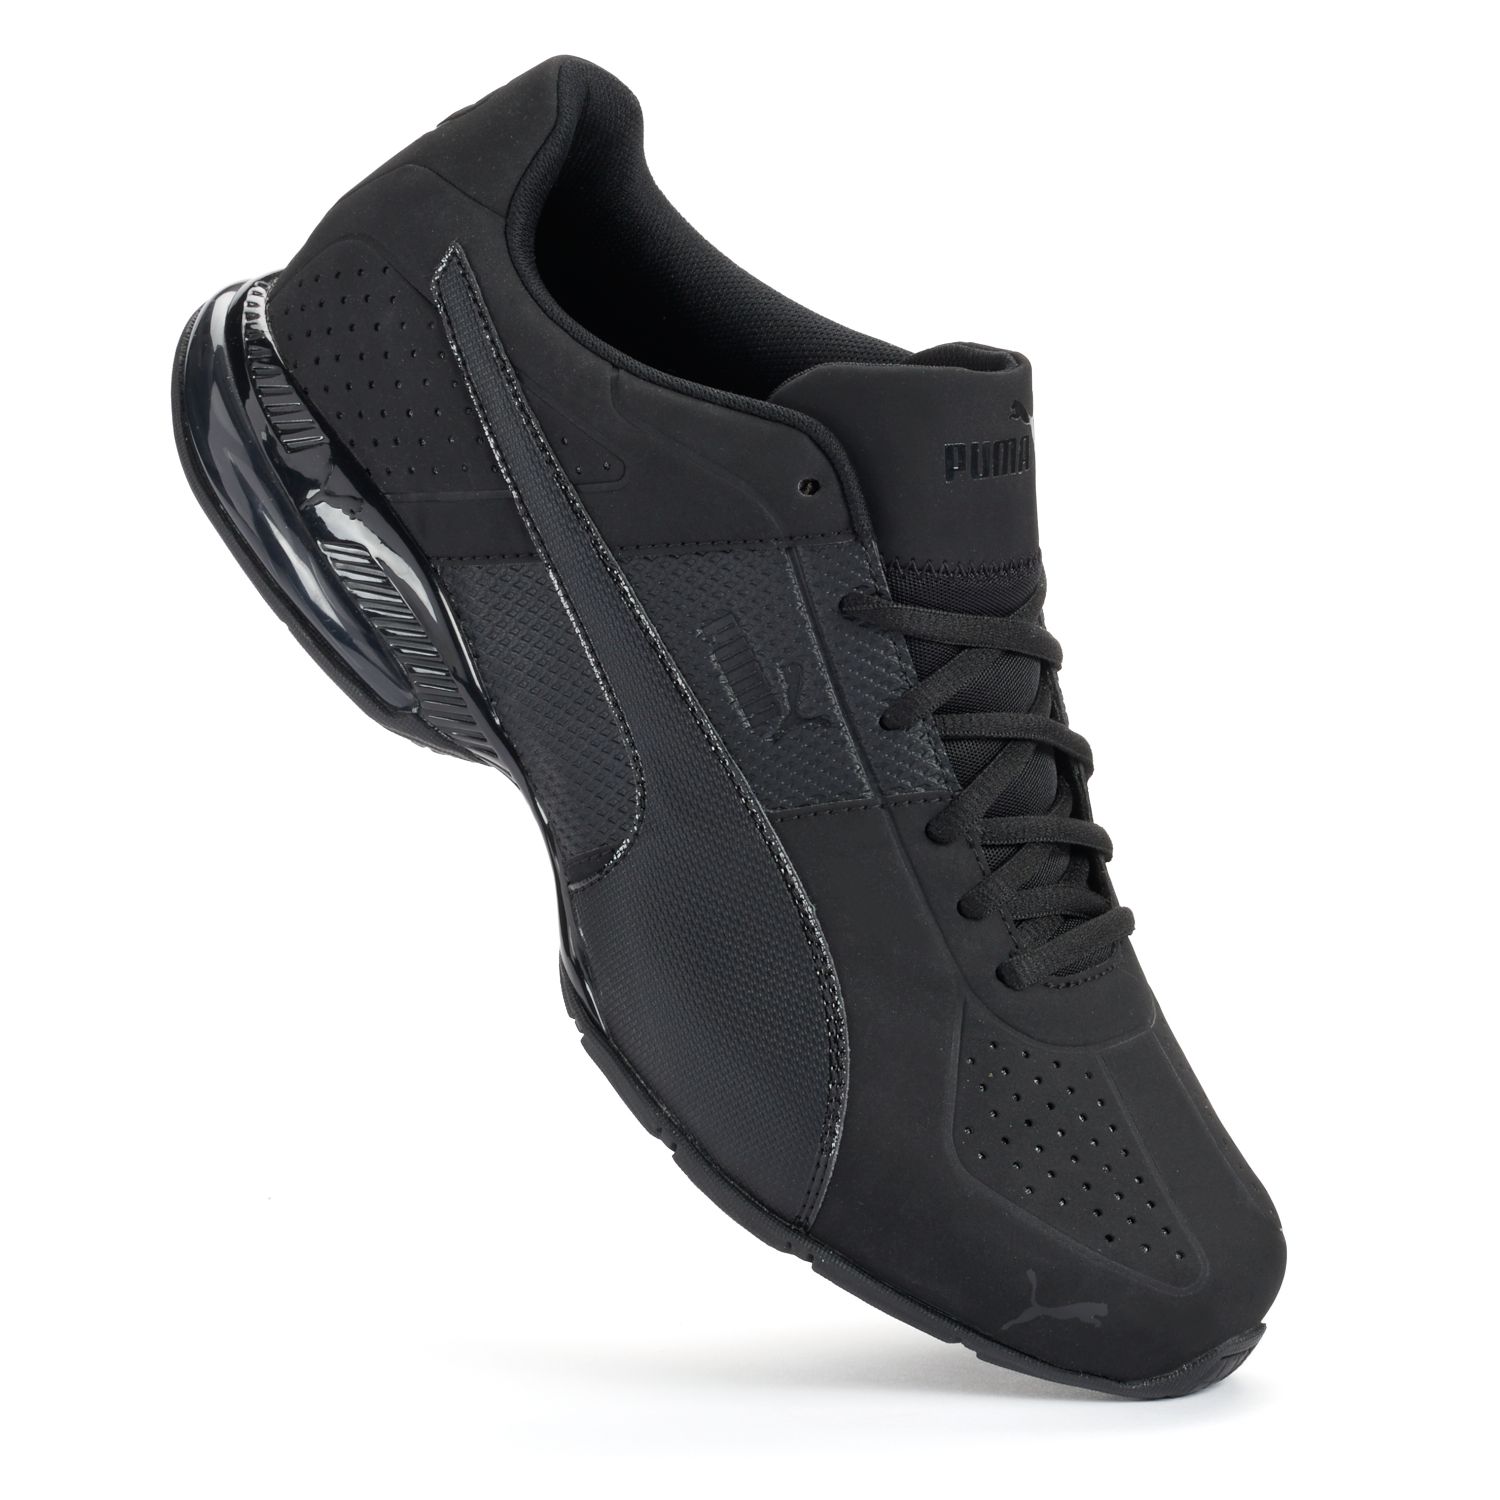 puma cell surin 2 matte athletic sneakers